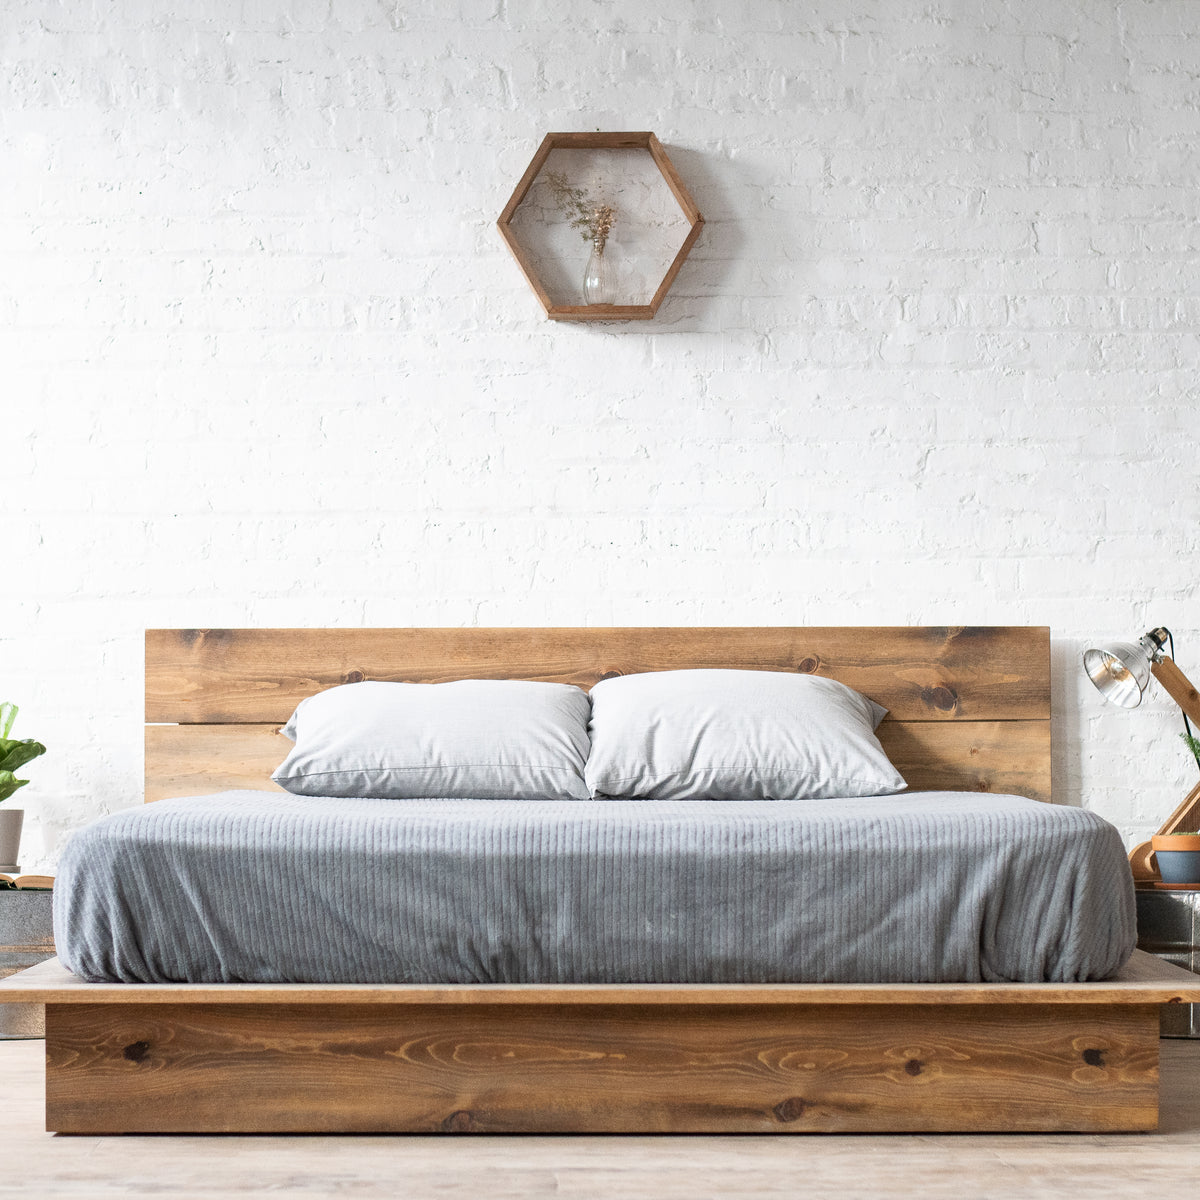 Low Pro - Rustic Modern Platform Bed Frame and Headboard - Loft Style